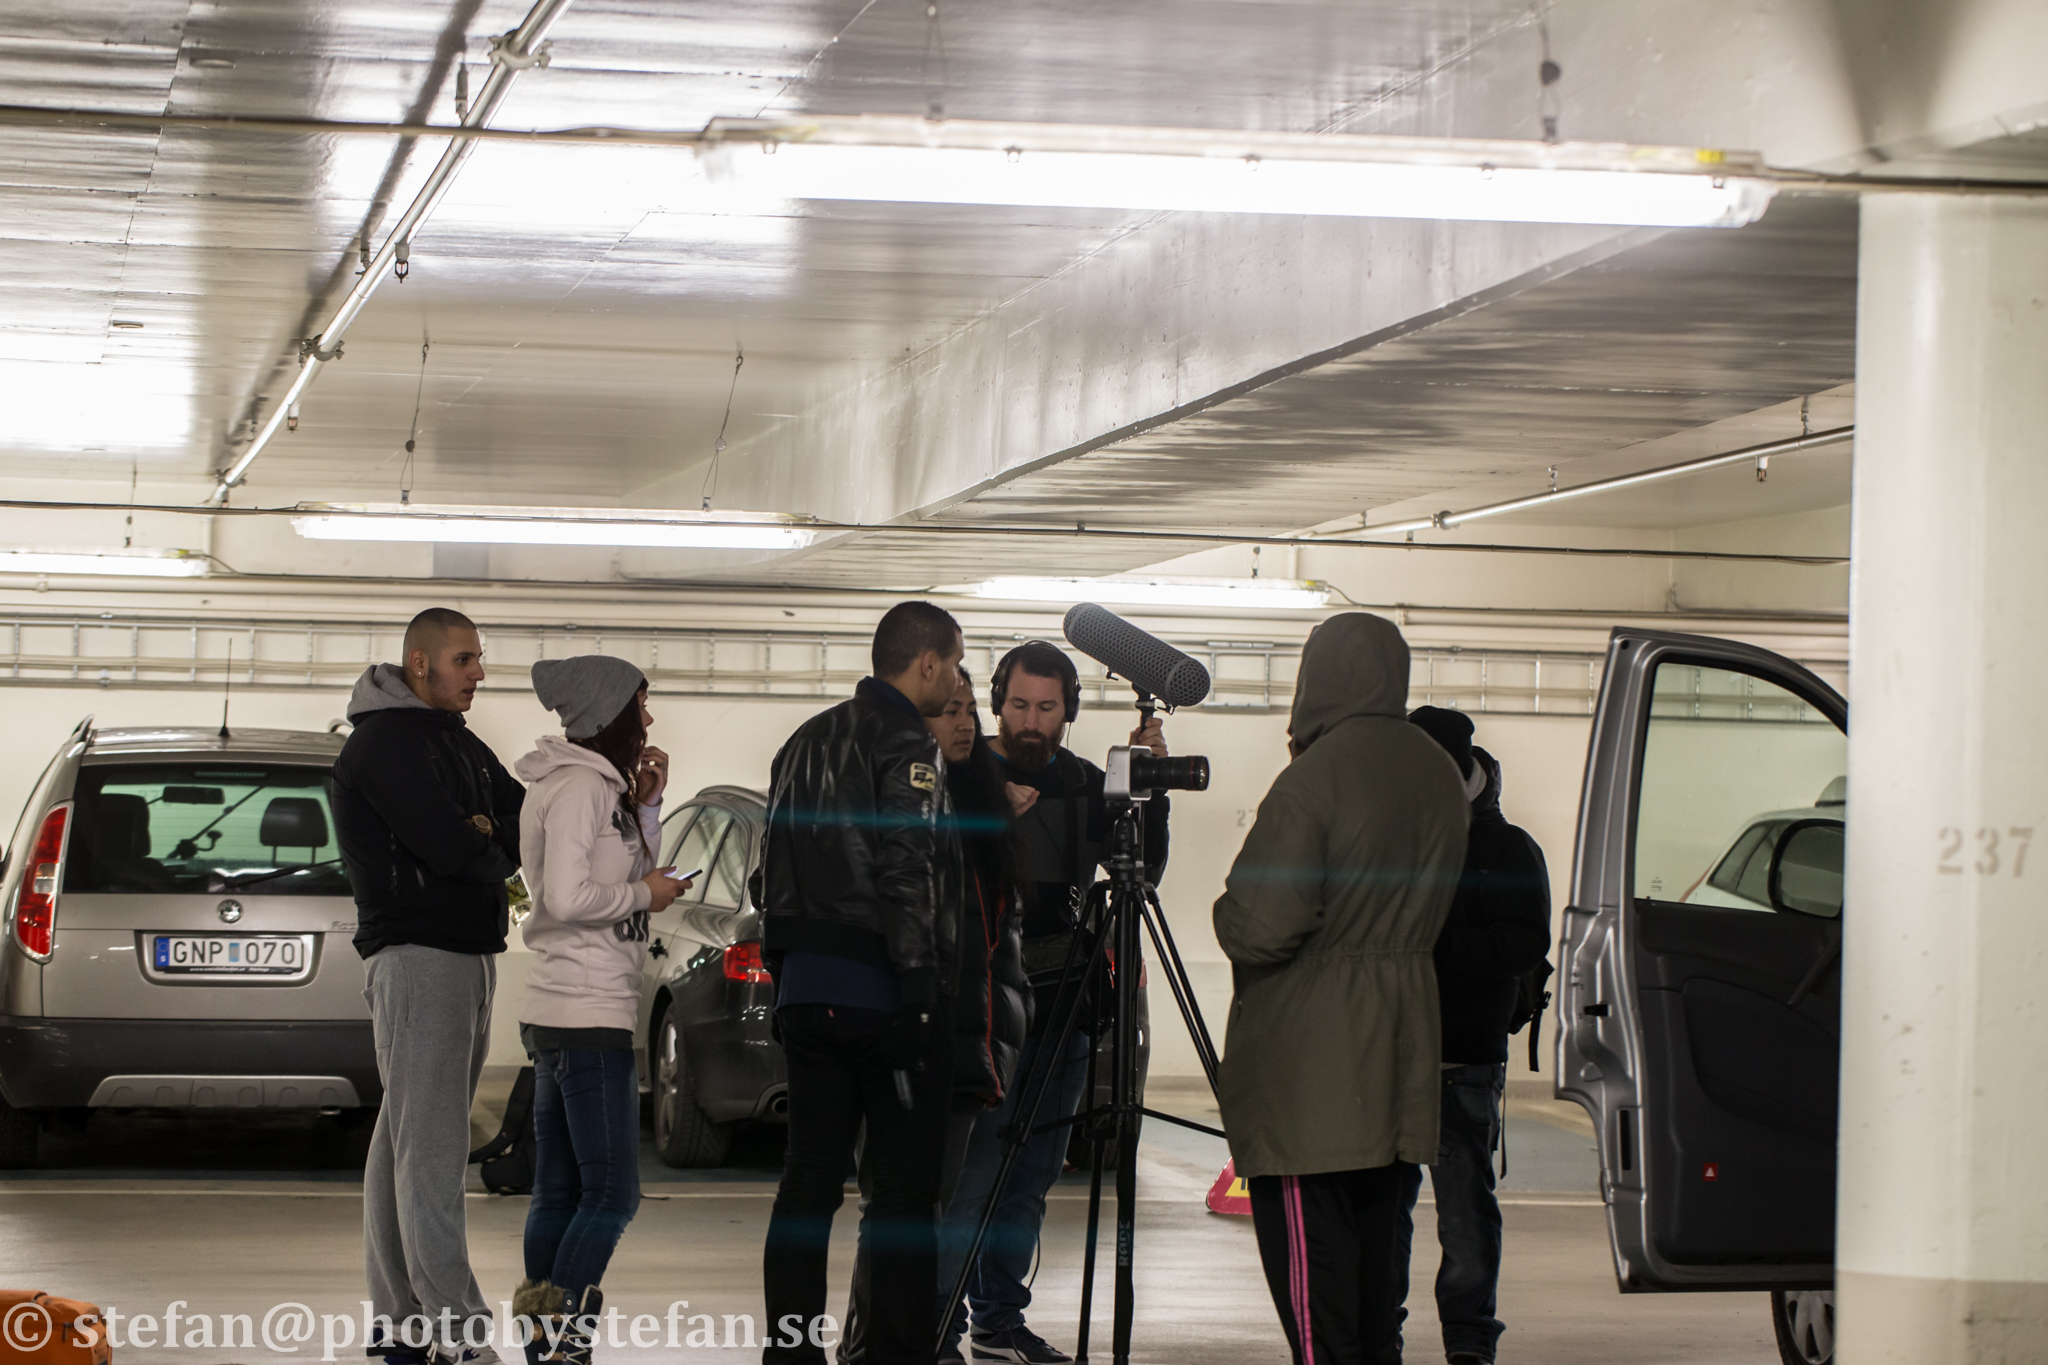 Behind the scene,filming of Mammi. A project by Said William Legue - script and story line, acting, directing.